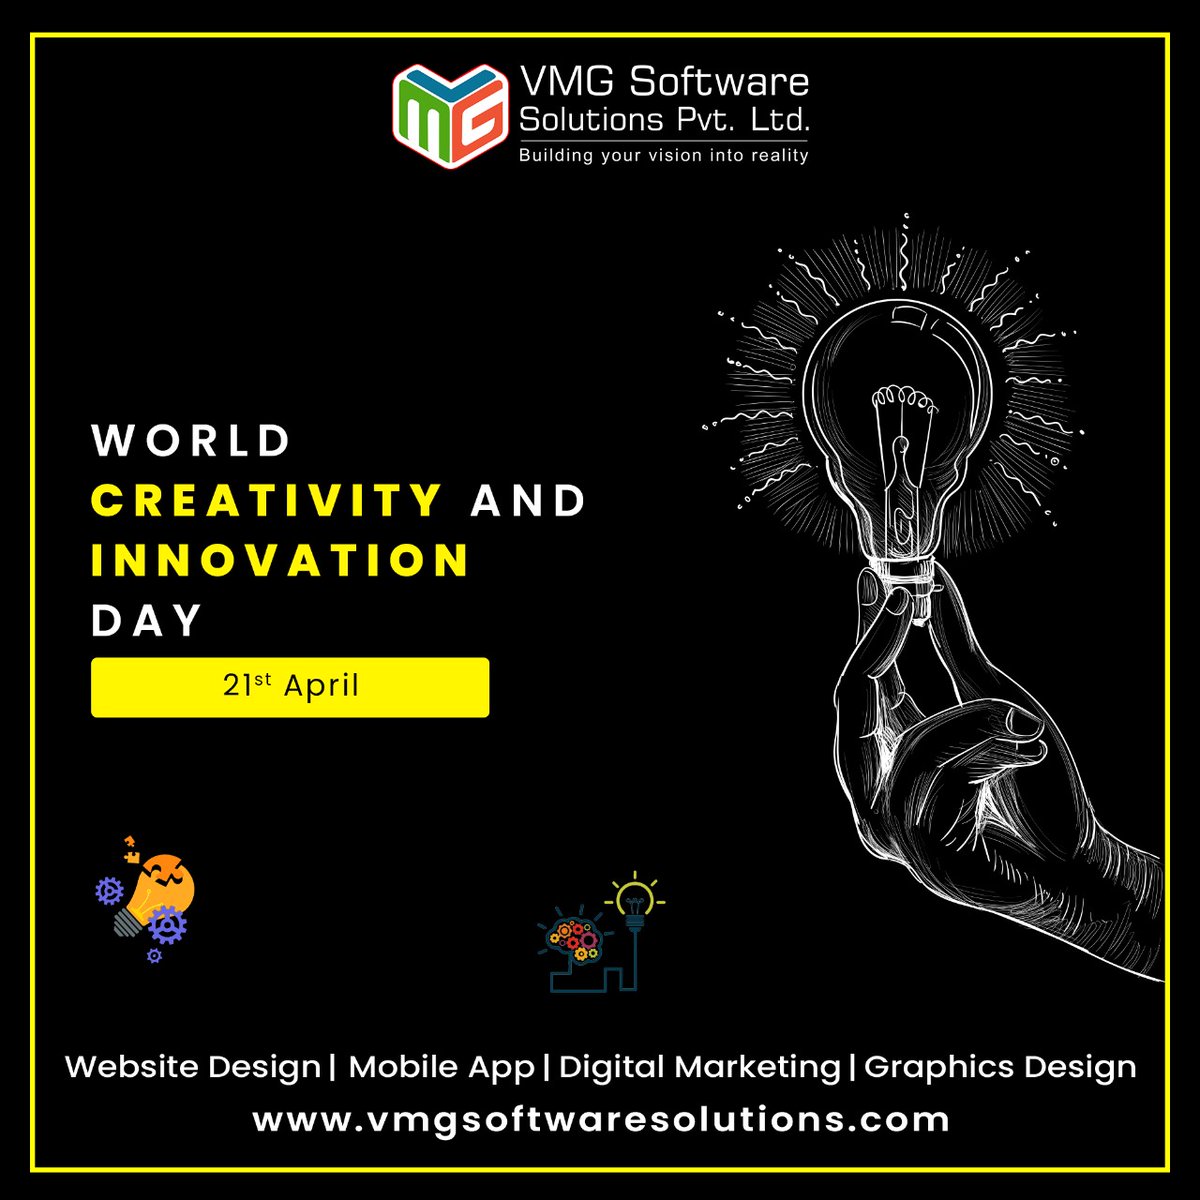 #HappyWorldCreativityandInnovationDay

The day is marked to raise awareness about the important roles that innovation and creativity play in every aspect of human development.

Visit Us: vmgsoftwaresolutions.com

#WebsiteDesign #DigitalMarketing #WordPress